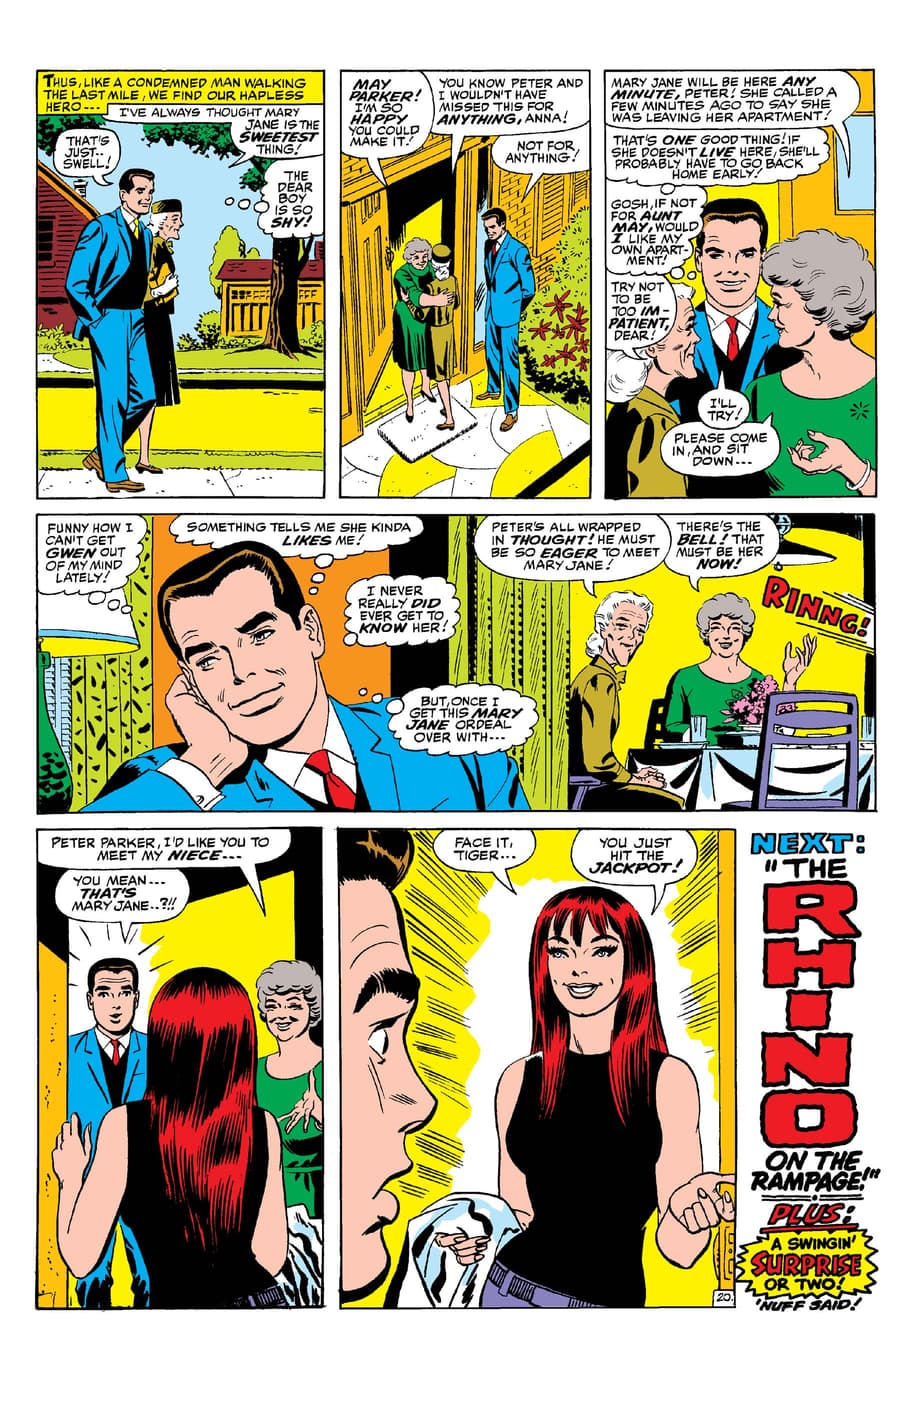 “Face it Tiger... you just hit the jackpot” – AMAZING SPIDER-MAN (1963) #42